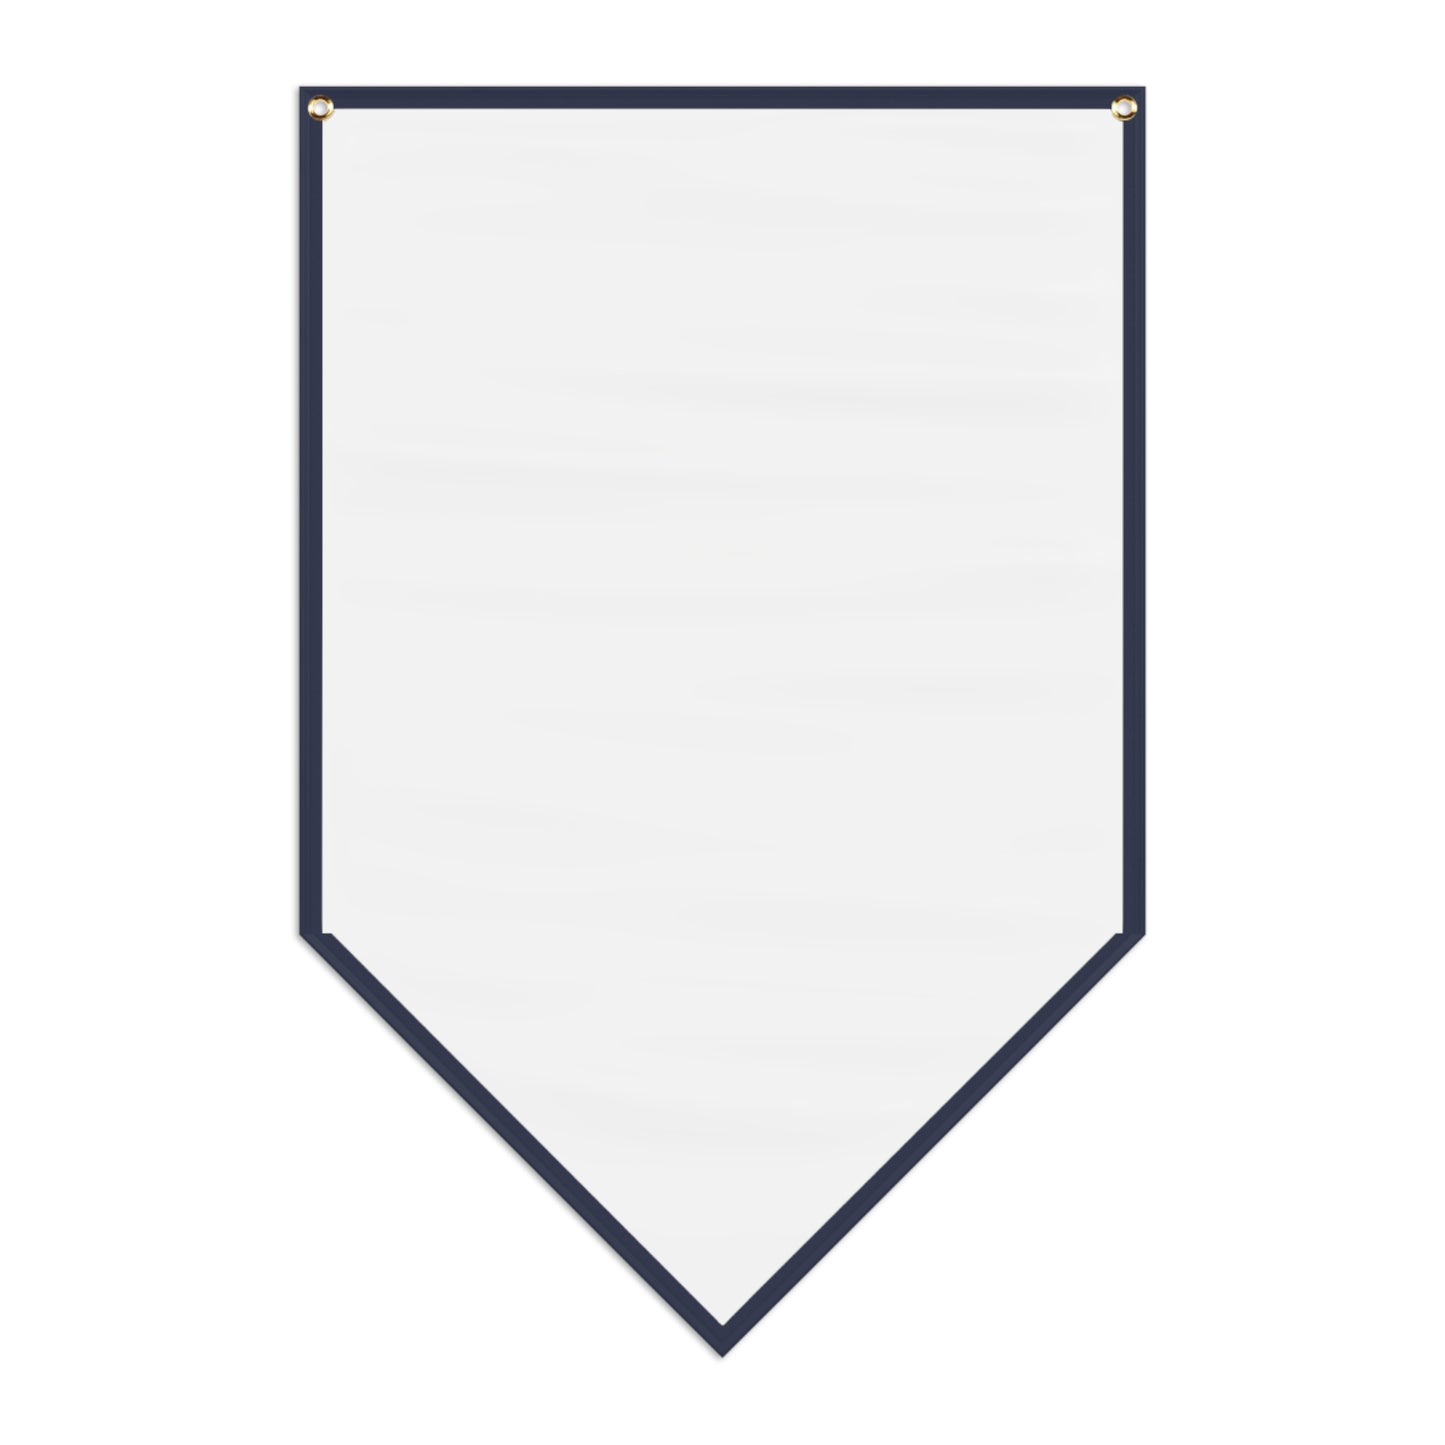 FLYBALL TITLE Pennant Banner